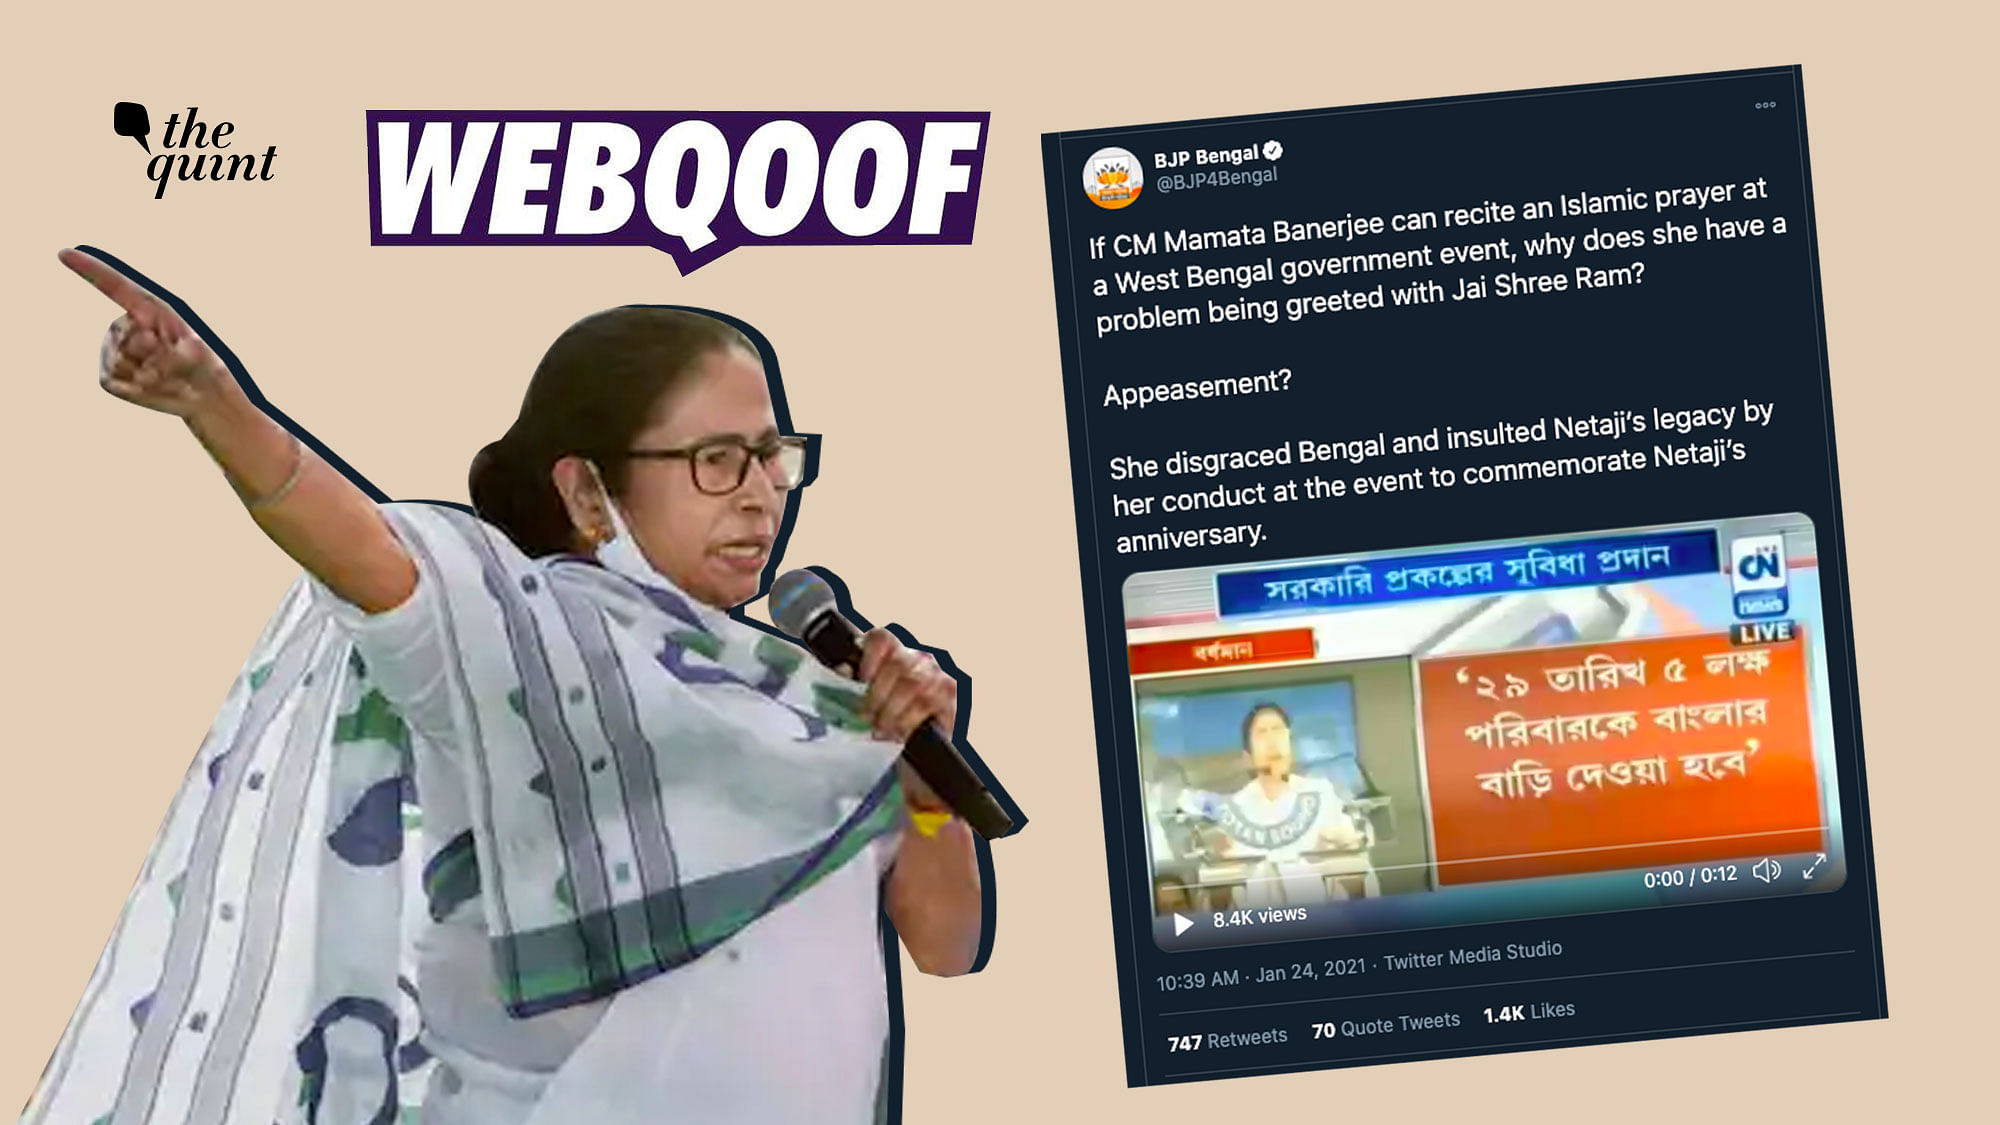 Bharatiya Janta Party’s (BJP) official West Bengal unit shared an old video of Banerjee reciting Islamic verses at an event.